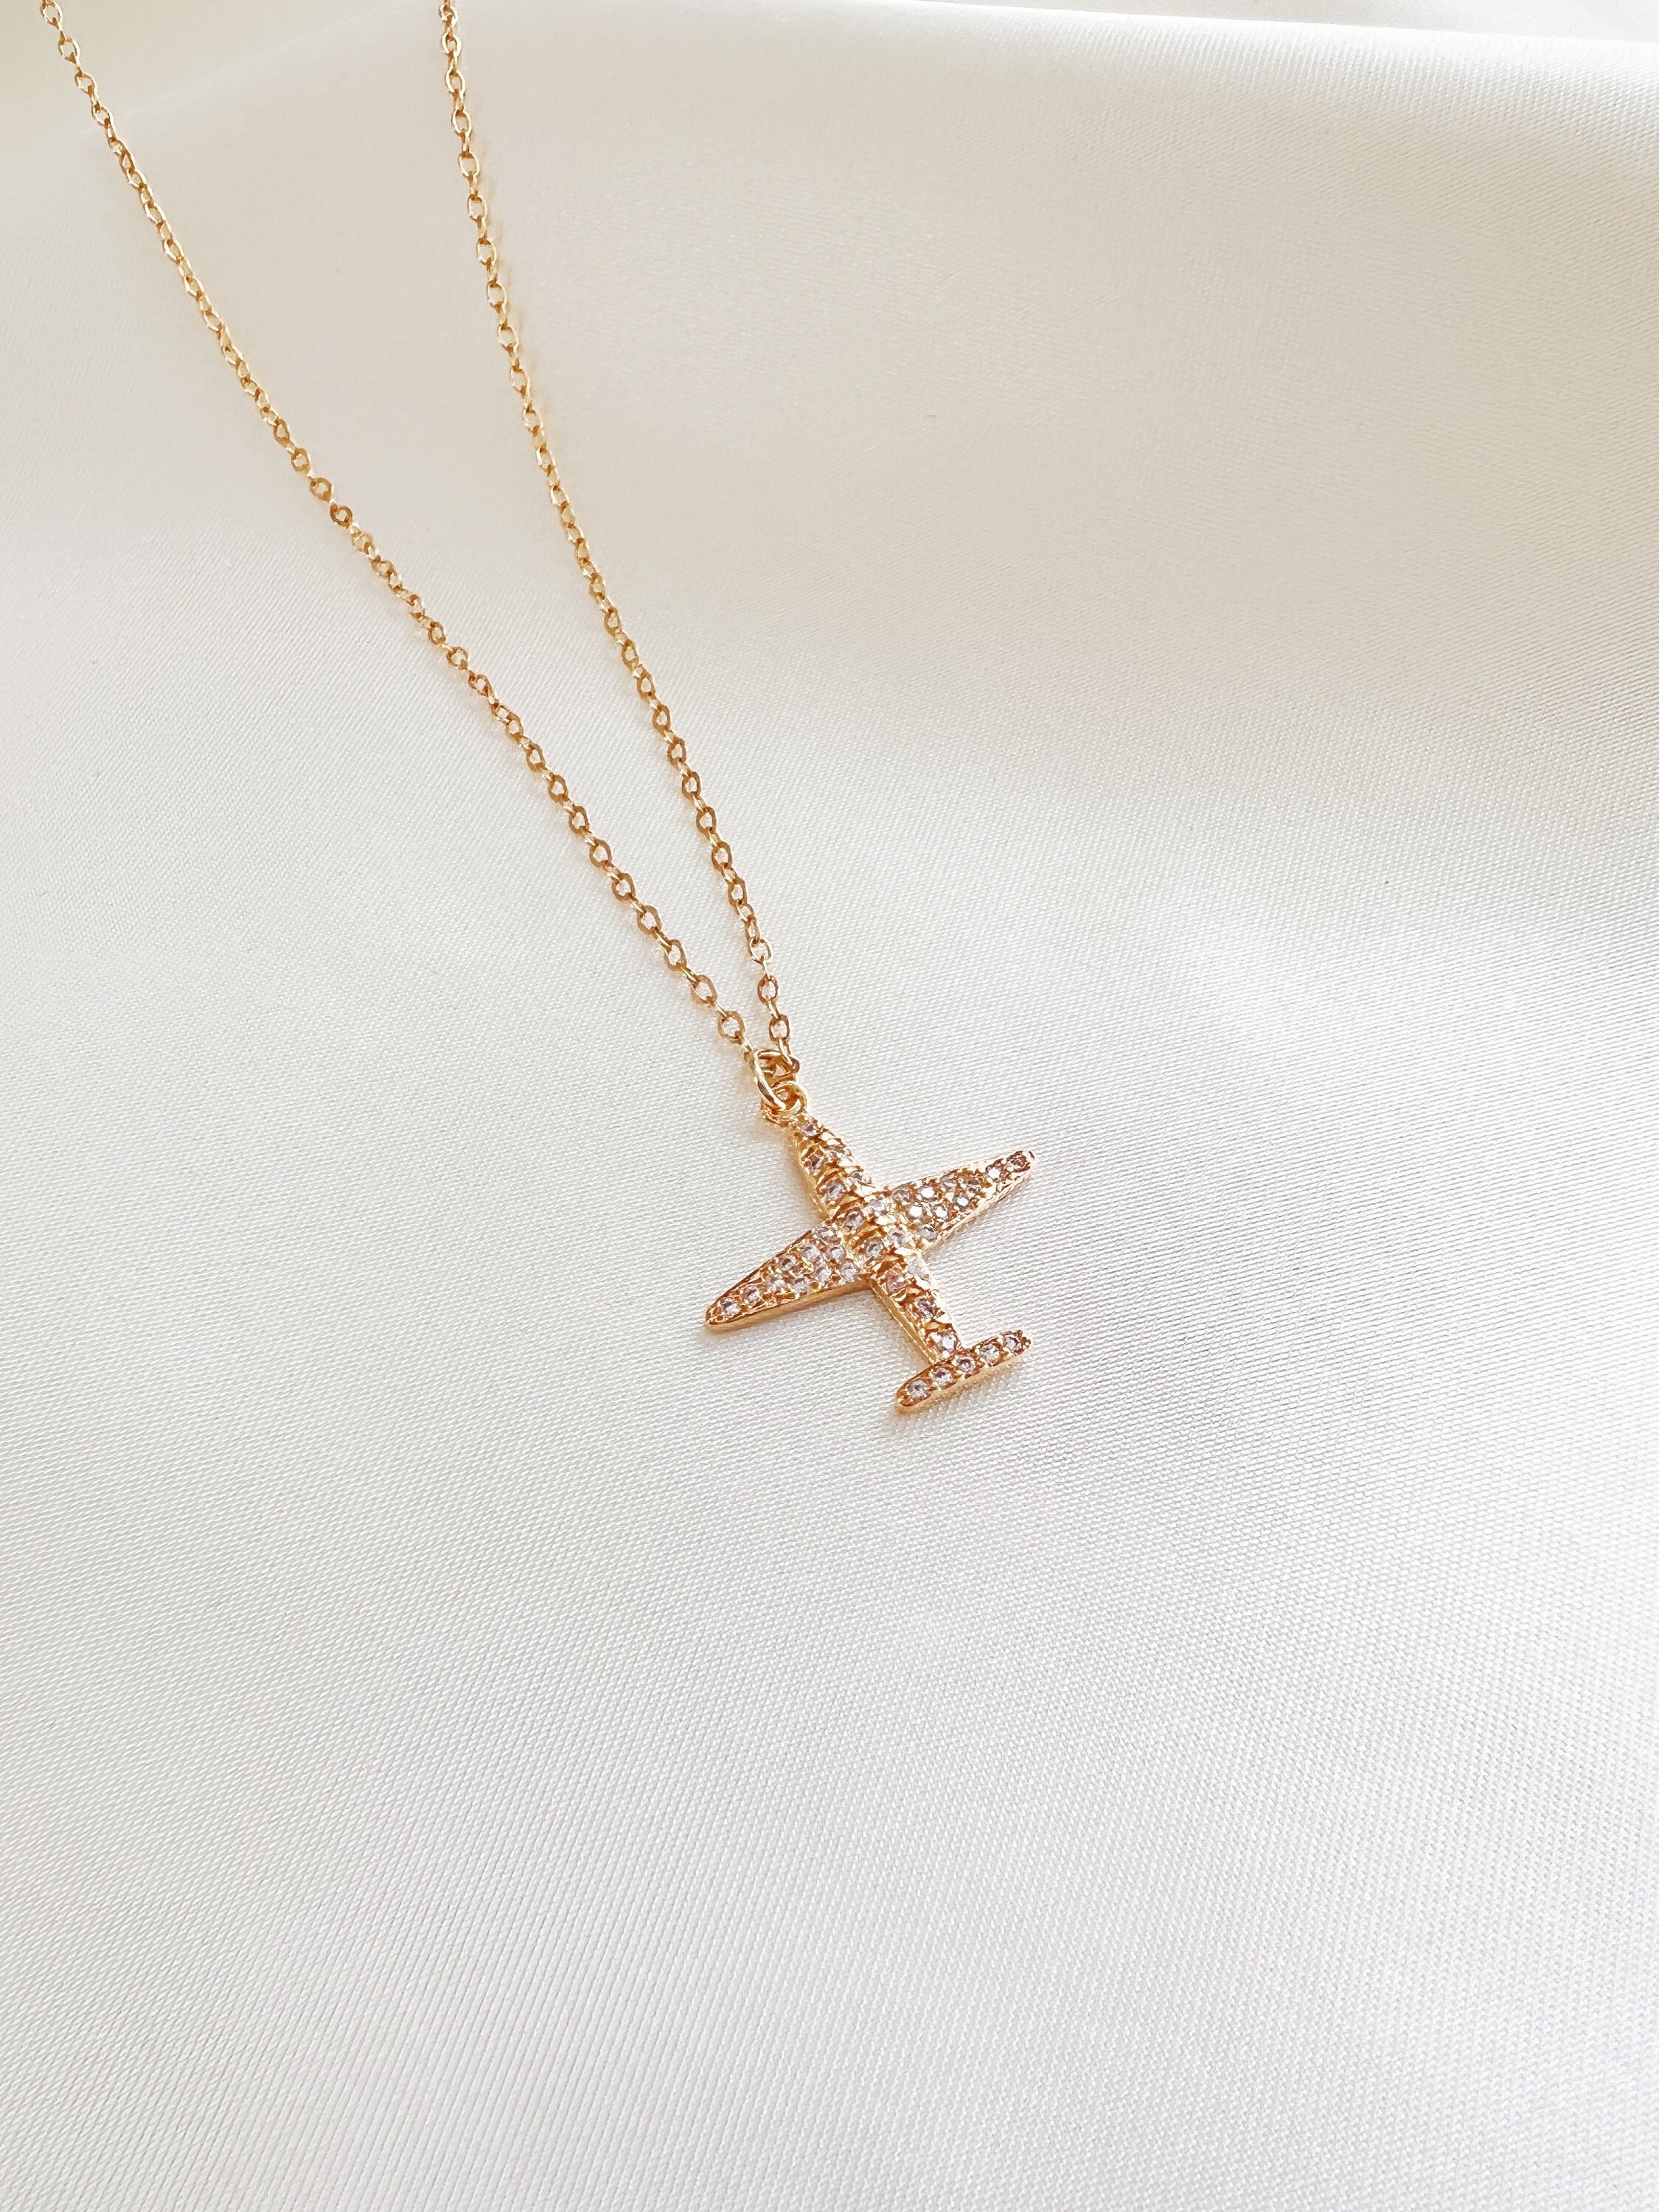 Iaceble Bohemia Airplane Necklace Choker Gold Aircraft Pendant Necklace  Flight Attendant Necklace Chain Minimalist Jet Plane Necklace Jewelry For